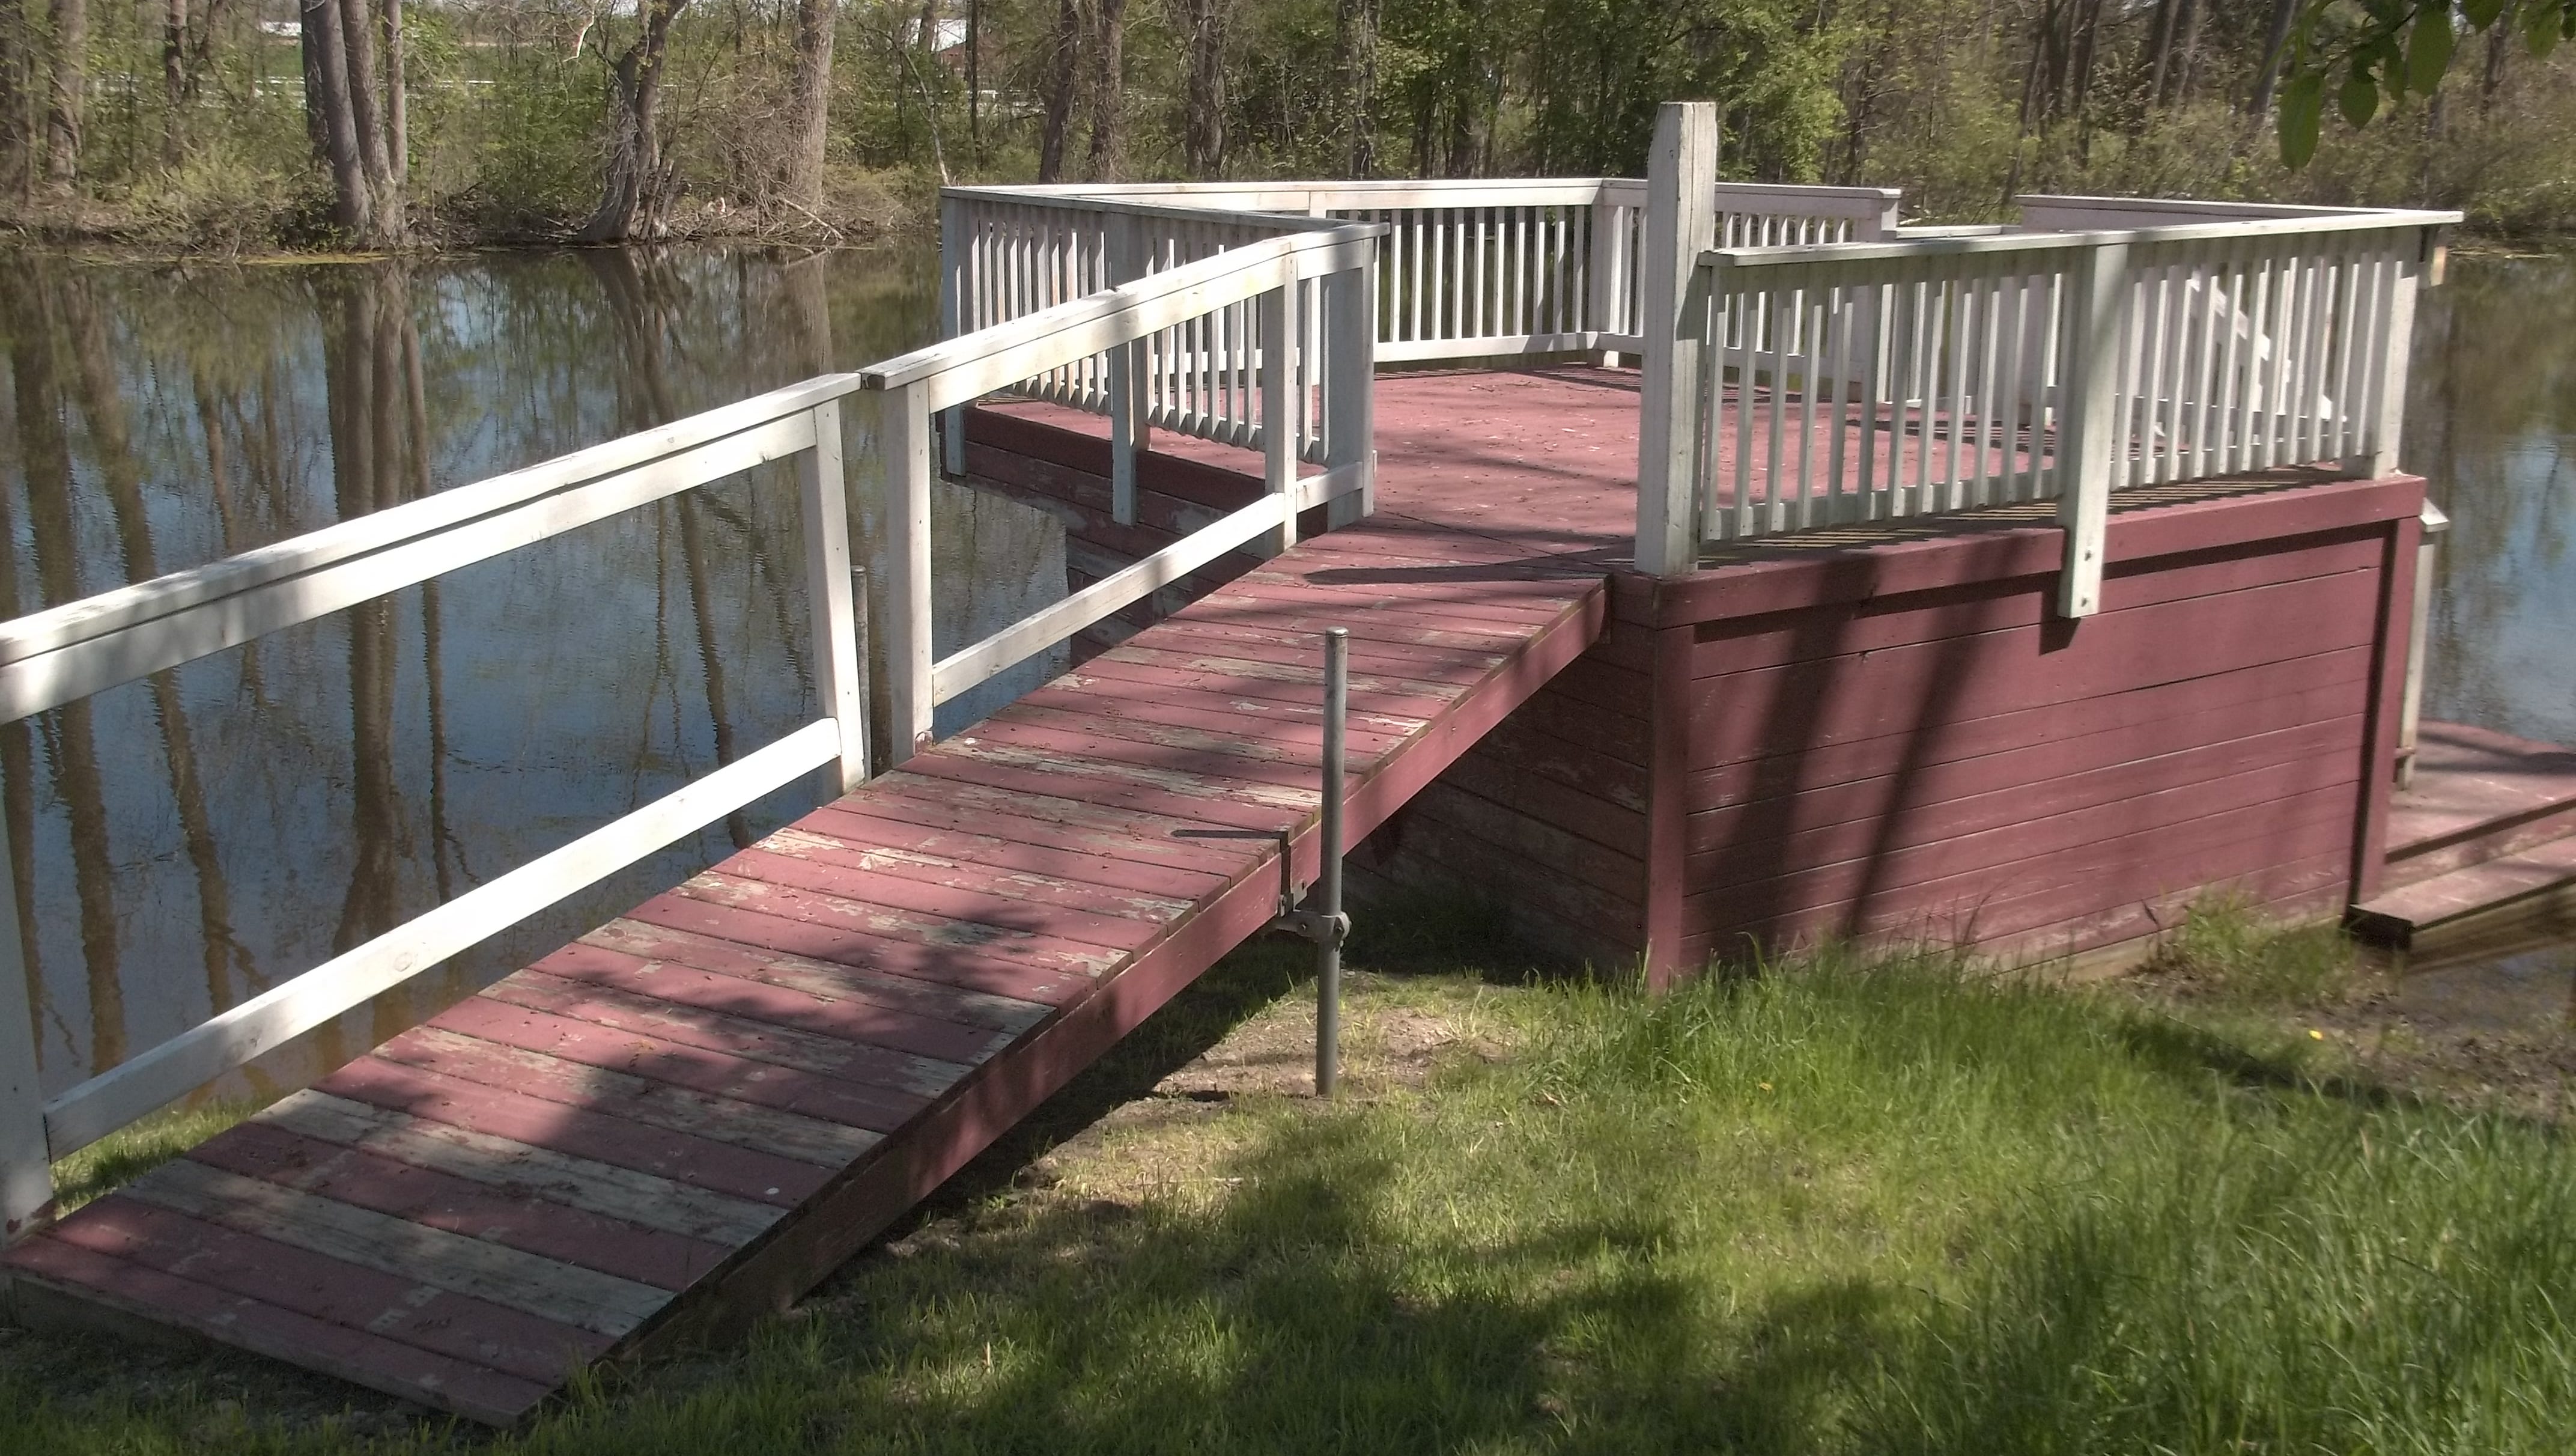 A ramp leads to a viewing platform beside the pond.